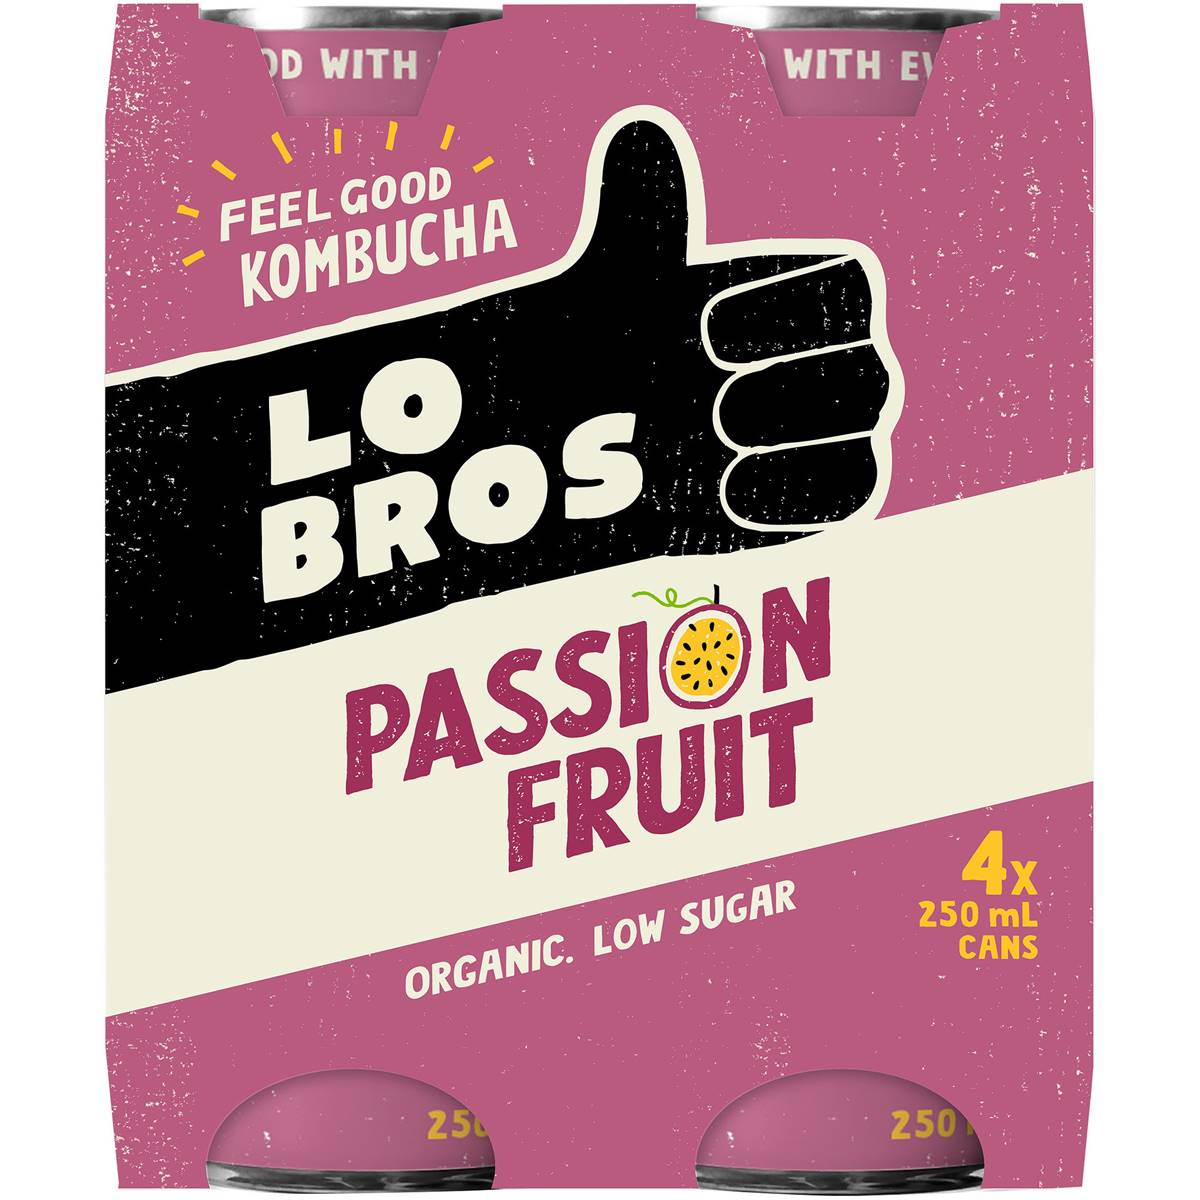 Calories in Lo Bros Kombucha Passionfruit Cans